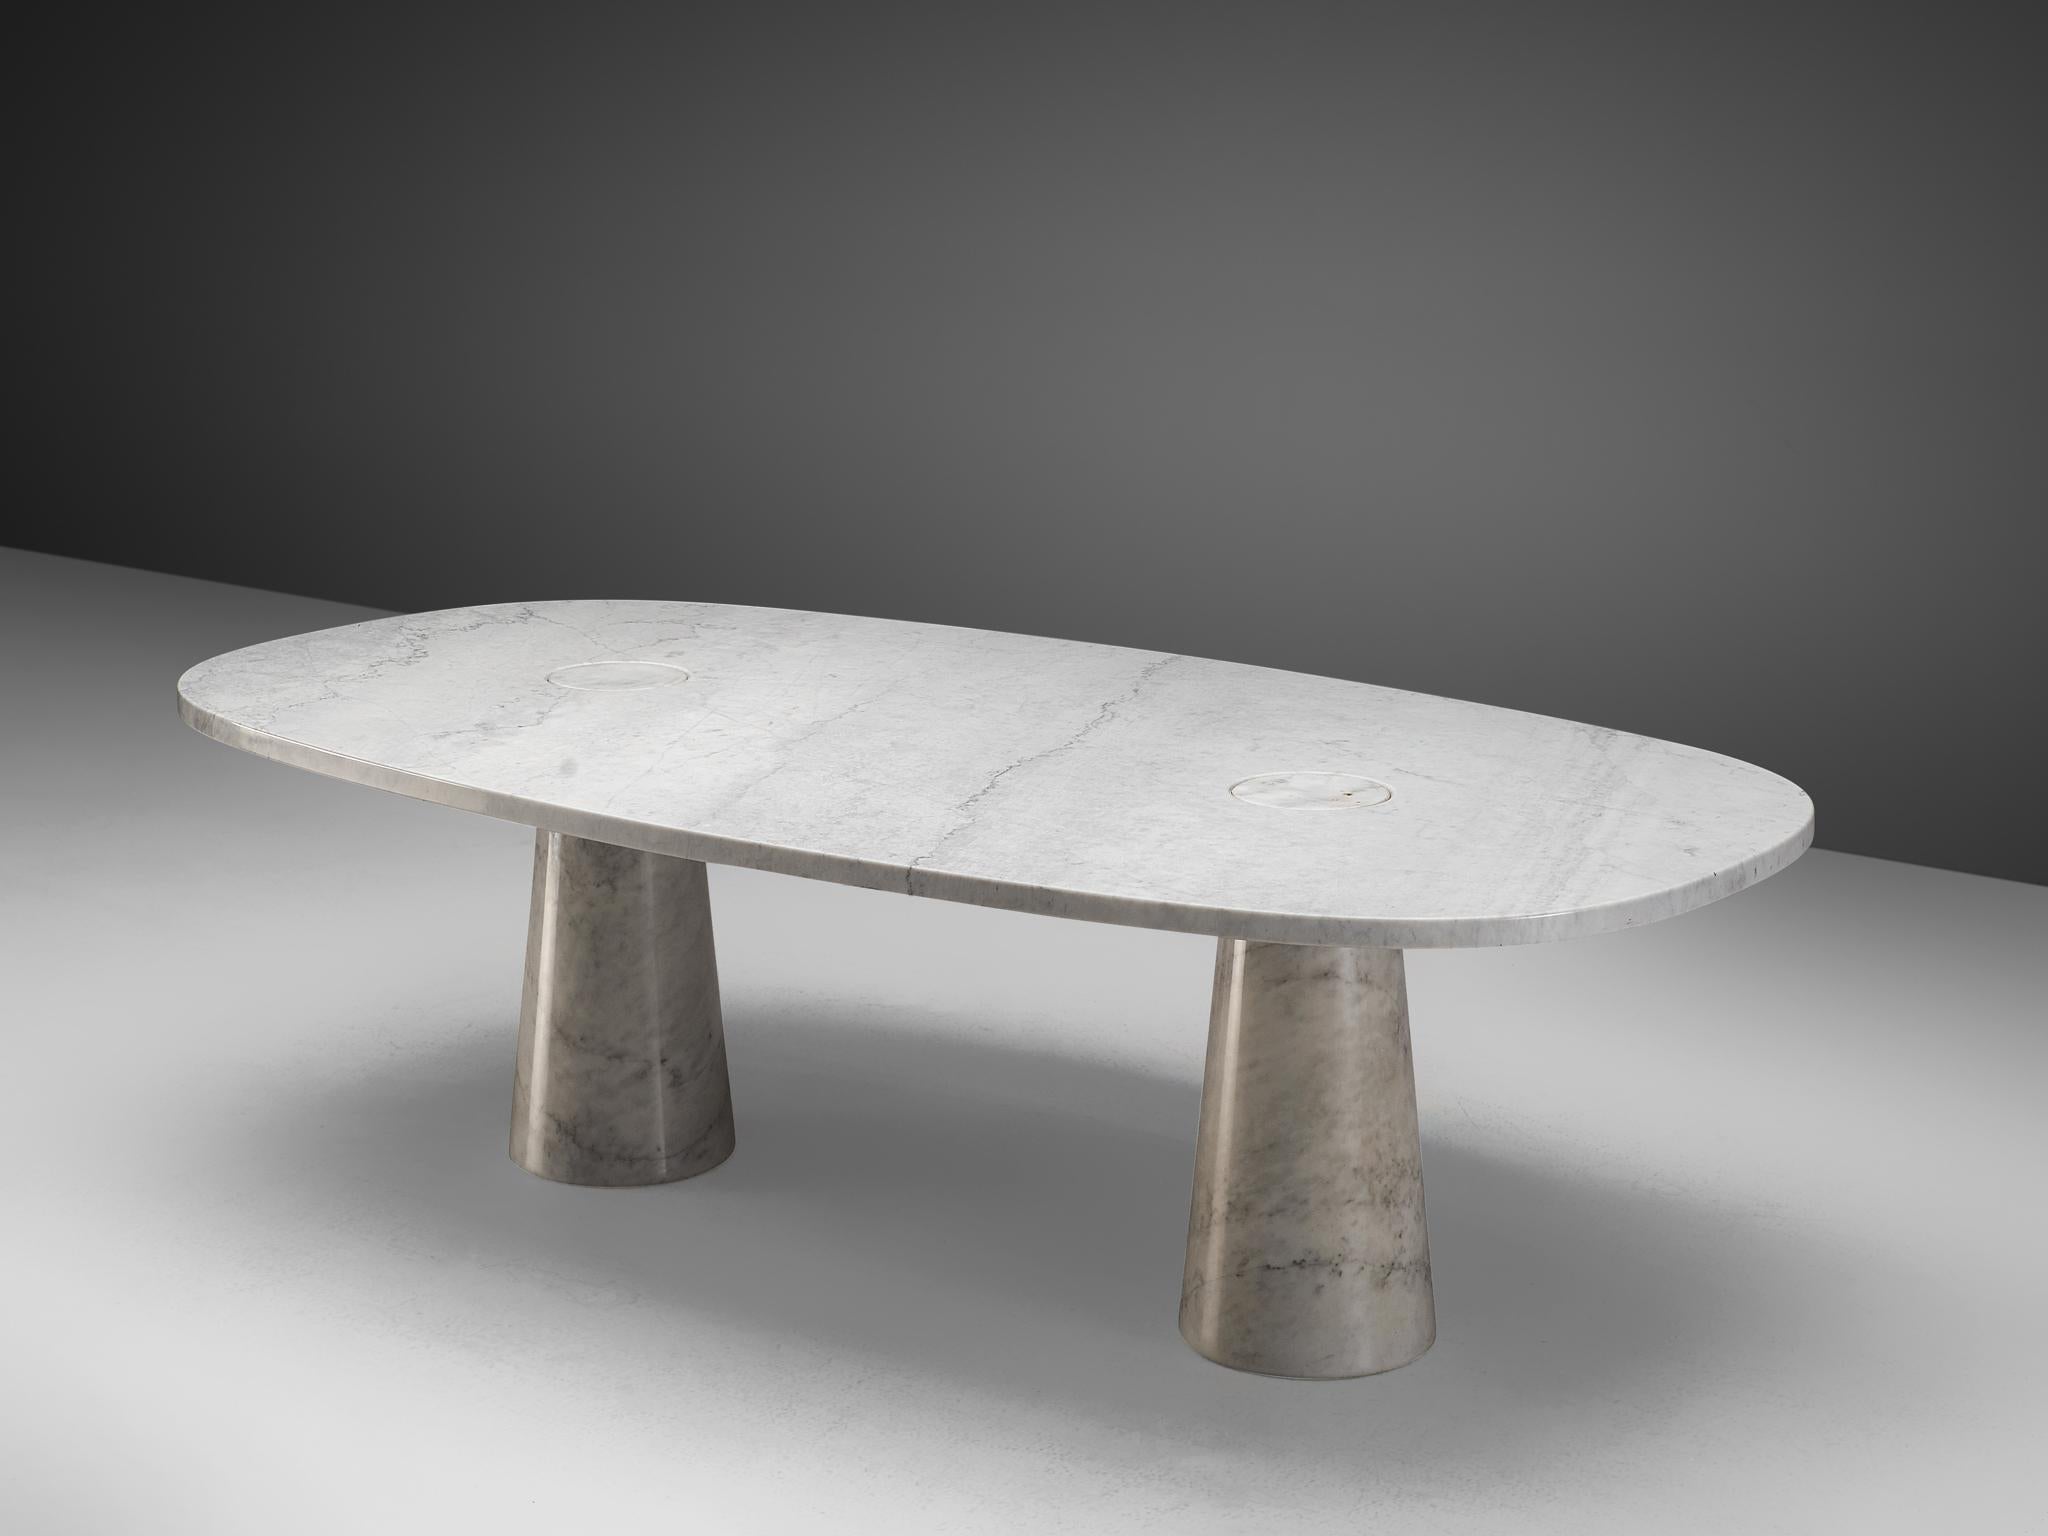 Angelo Mangiarotti, 'Eros' dining table, Carrara marble, Italy, 1970s

This sculptural table by Angelo Mangiarotti is a skillful example of postmodern design. The table is executed in white marble. The oval table features no joints or clamps and